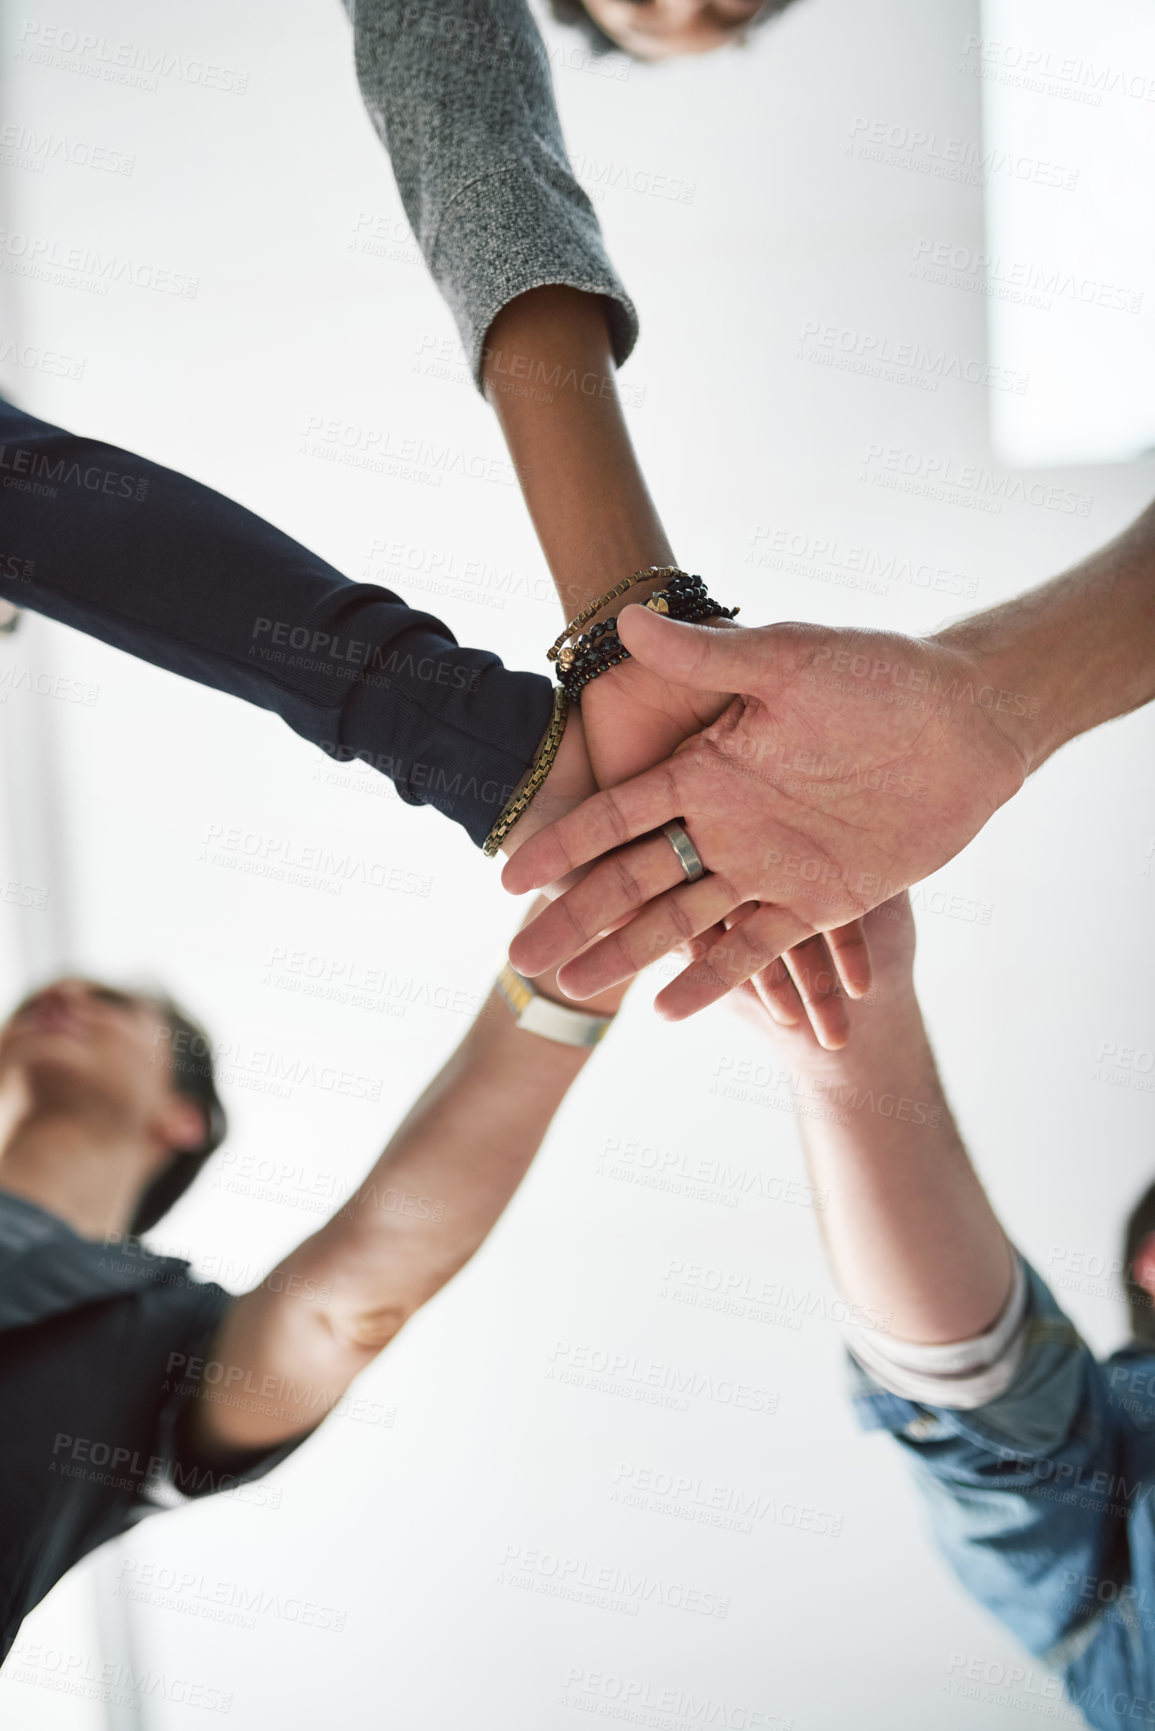 Buy stock photo Cropped shot of a group of people stacking their hands on top of each other